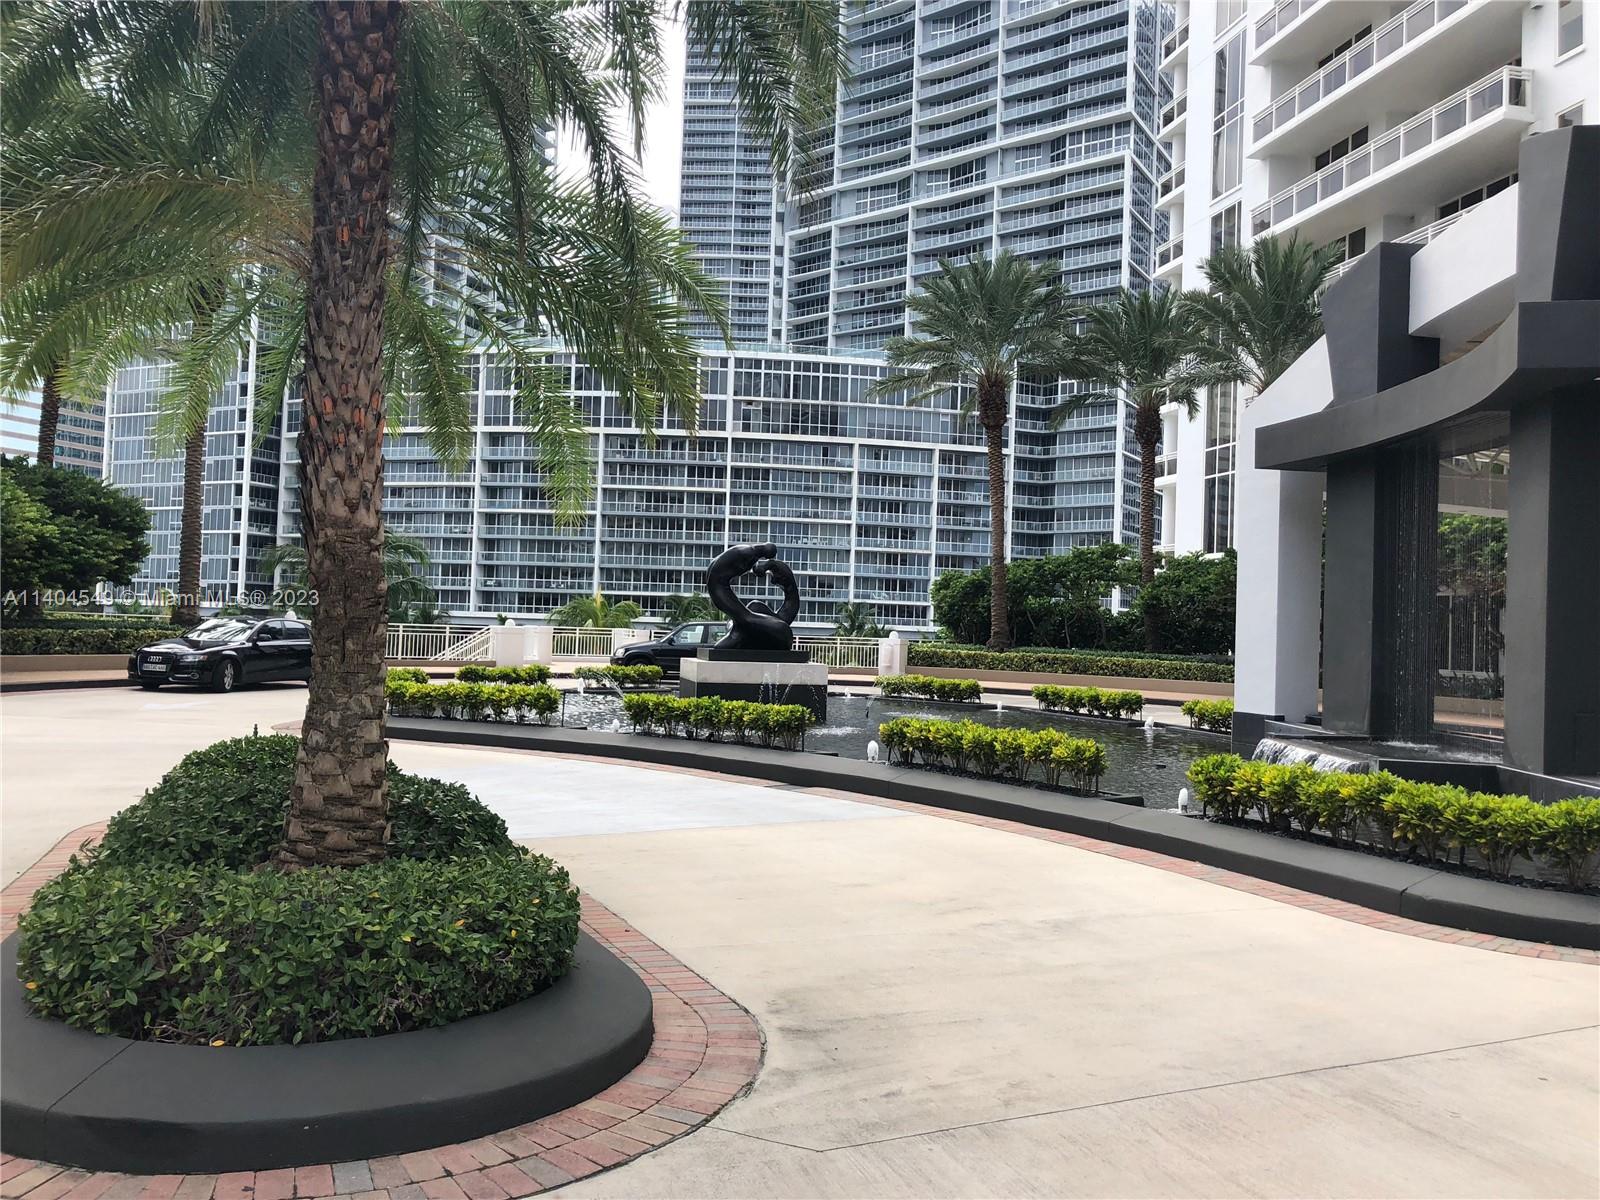 Stunning/rare 4/4/1 2860 sq/ft. flow through unit w/ 2 large wrap around balconies & amazing views of Downtown, Biscayne Bay, Brickell Key & Brickell. The unit has being remodeled, kitchen w/ custom cabinetry, Sub Zero/Miele. Built-in custom cabinetry in bedrooms, custom closets, a full laundry room & more... The Carbonell on Brickell Key has 24/7 security, 24/7 free valet, one of the nicest 2-story renovated fitness centers in Miami, a waterfront resort style pool, a BBQ area, 2 tennis courts, a putting green, a bayside party room, and much more.